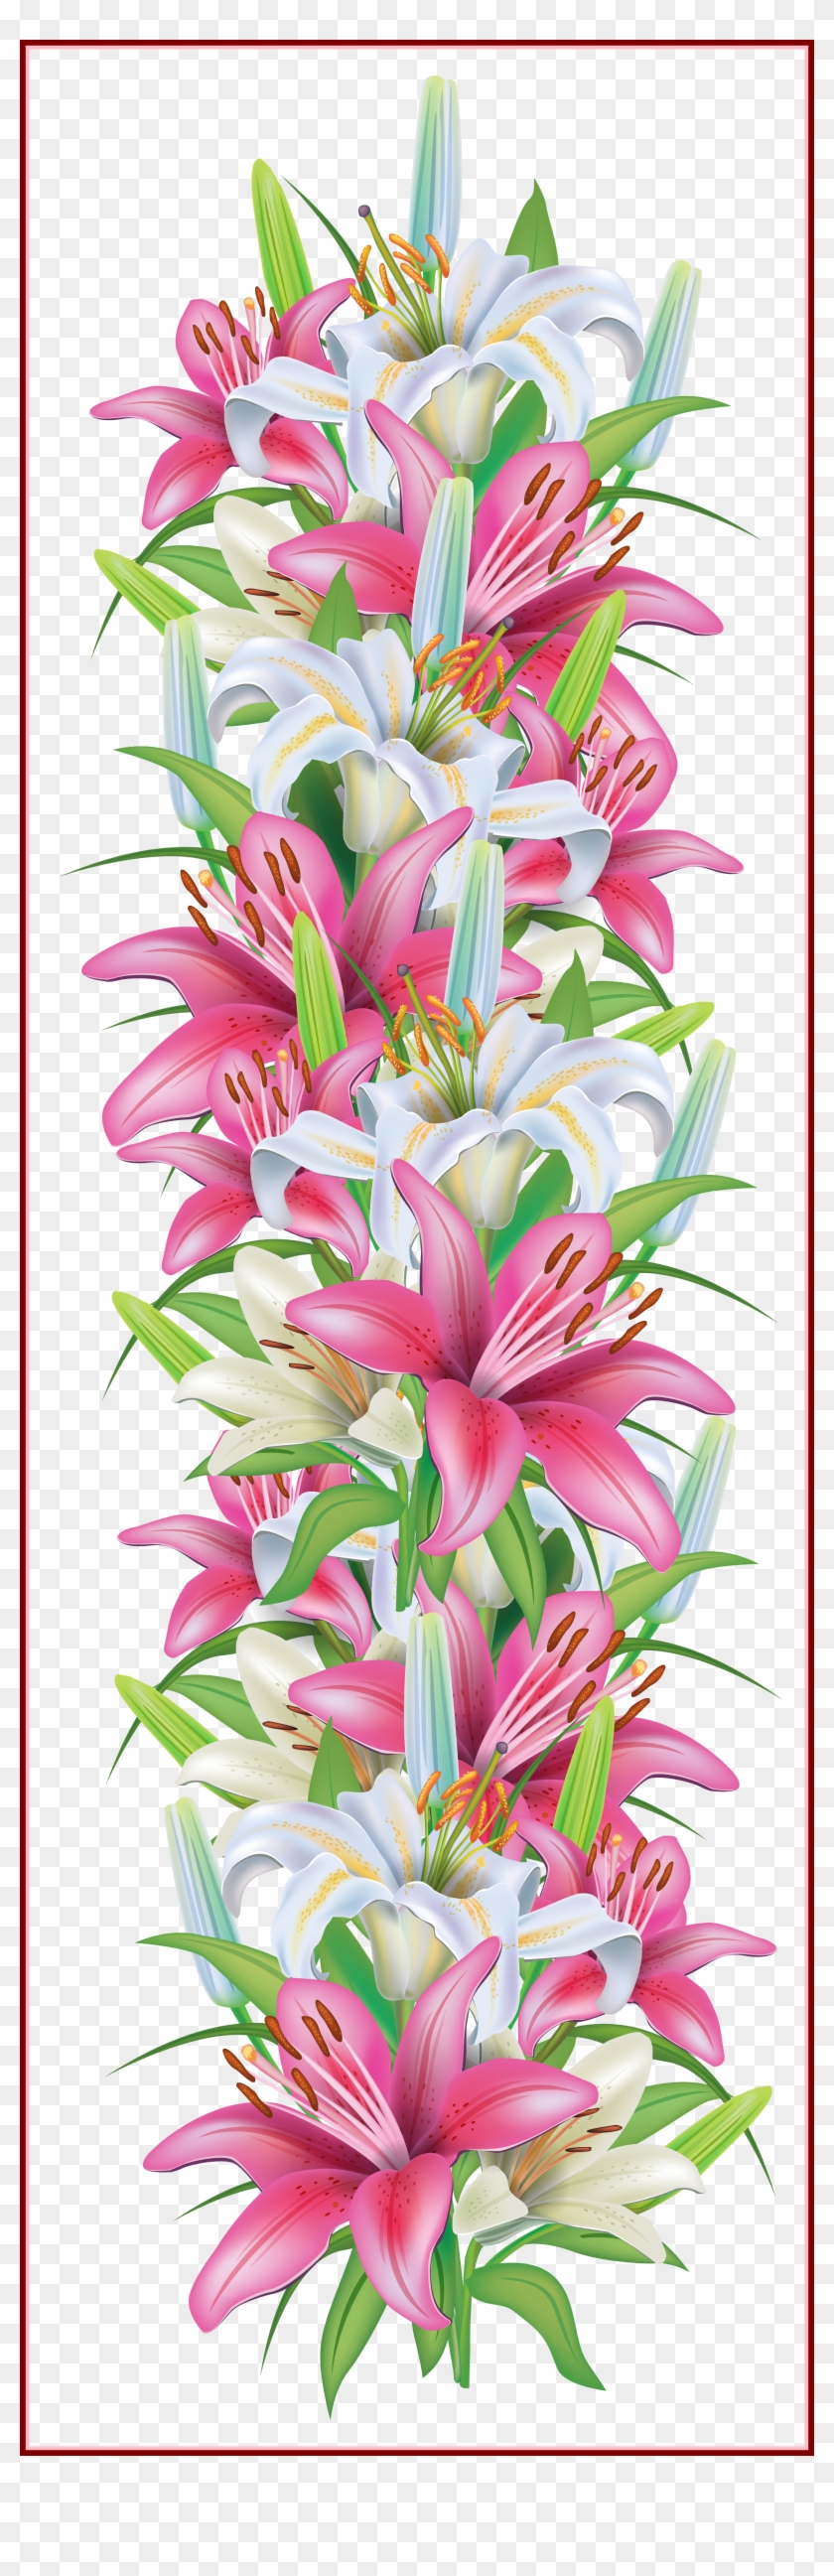 Inspiring Pink And White Lilies Decoration Border Png - Bansuansukdee Paper For Decoupage Vintage Style And #1291444